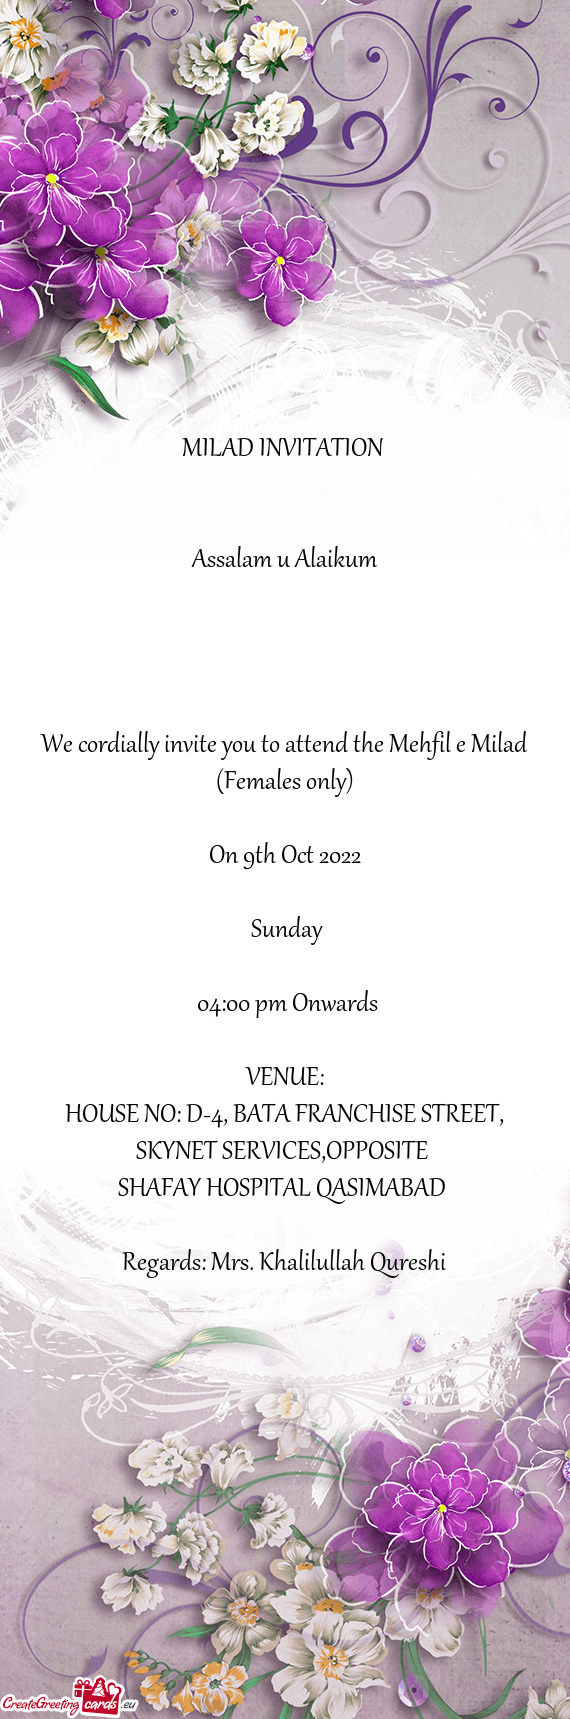 We cordially invite you to attend the Mehfil e Milad (Females only)